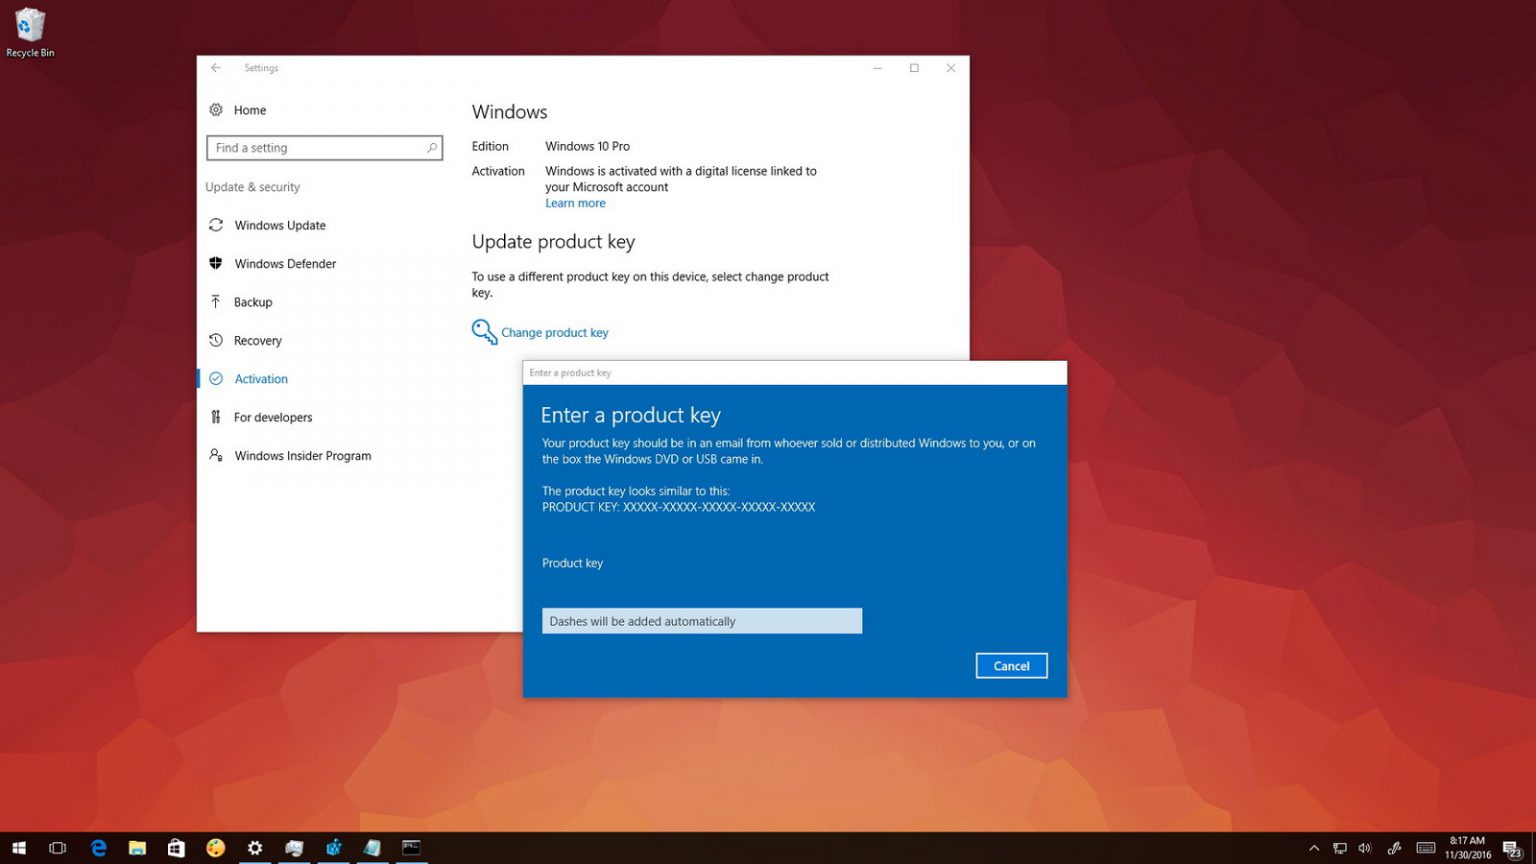 enter the product key to activate windows 10 pro